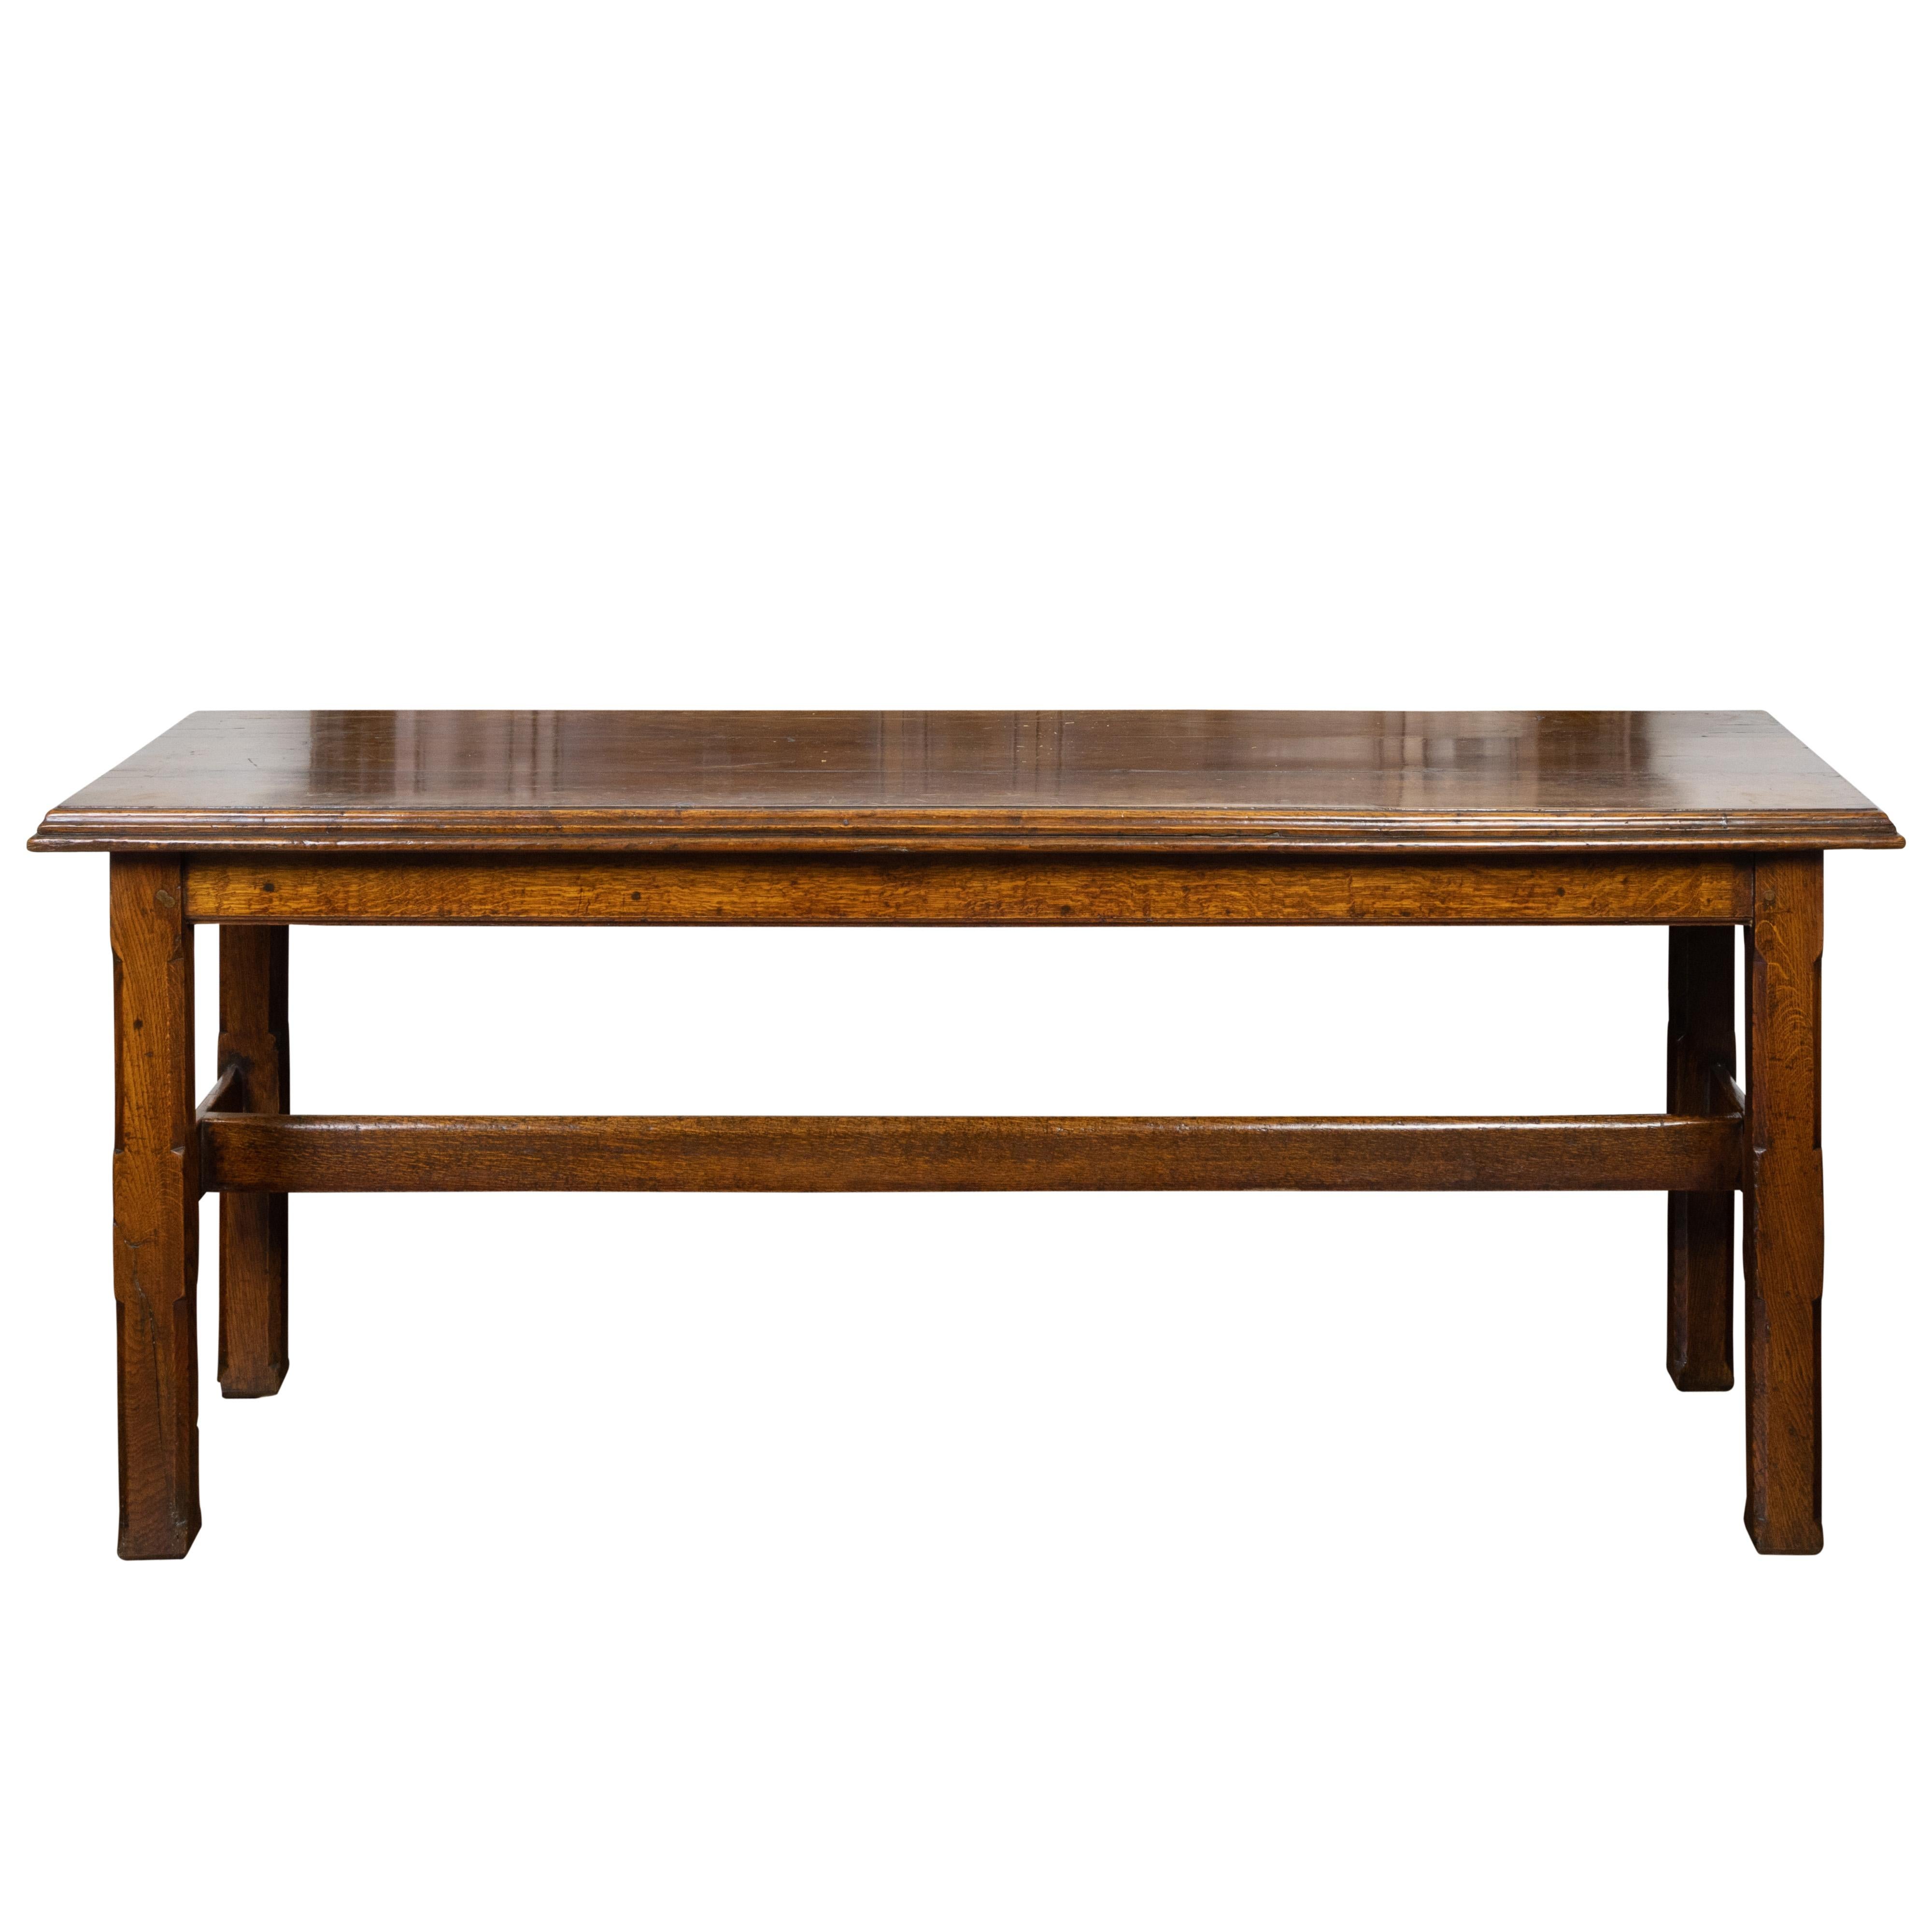 English 19th Century Oak Table with Straight Legs and H-Form Cross Stretcher